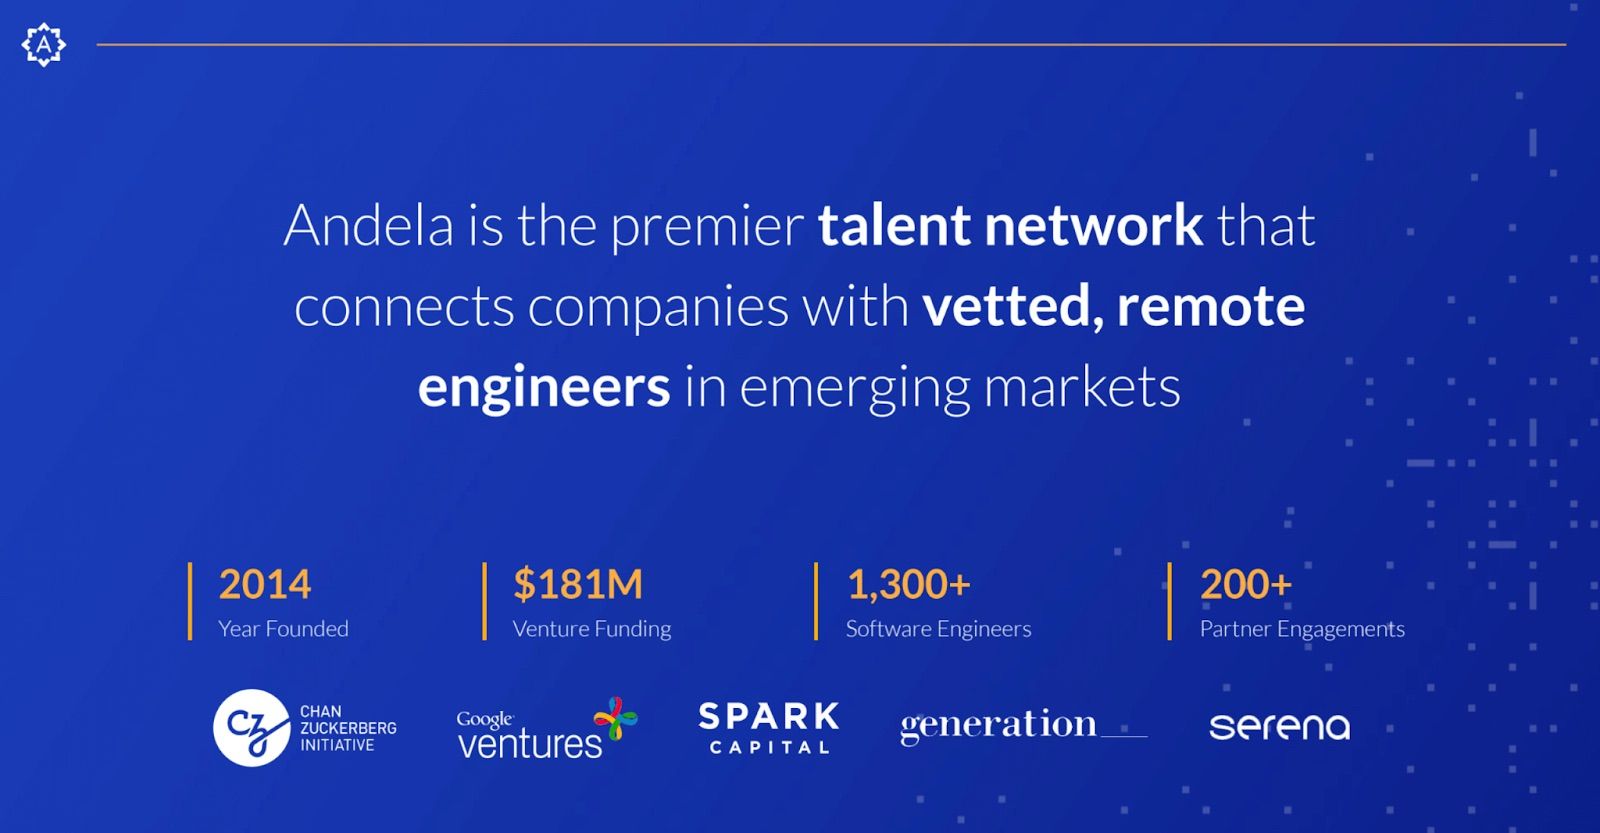 Andela is a premier talent network